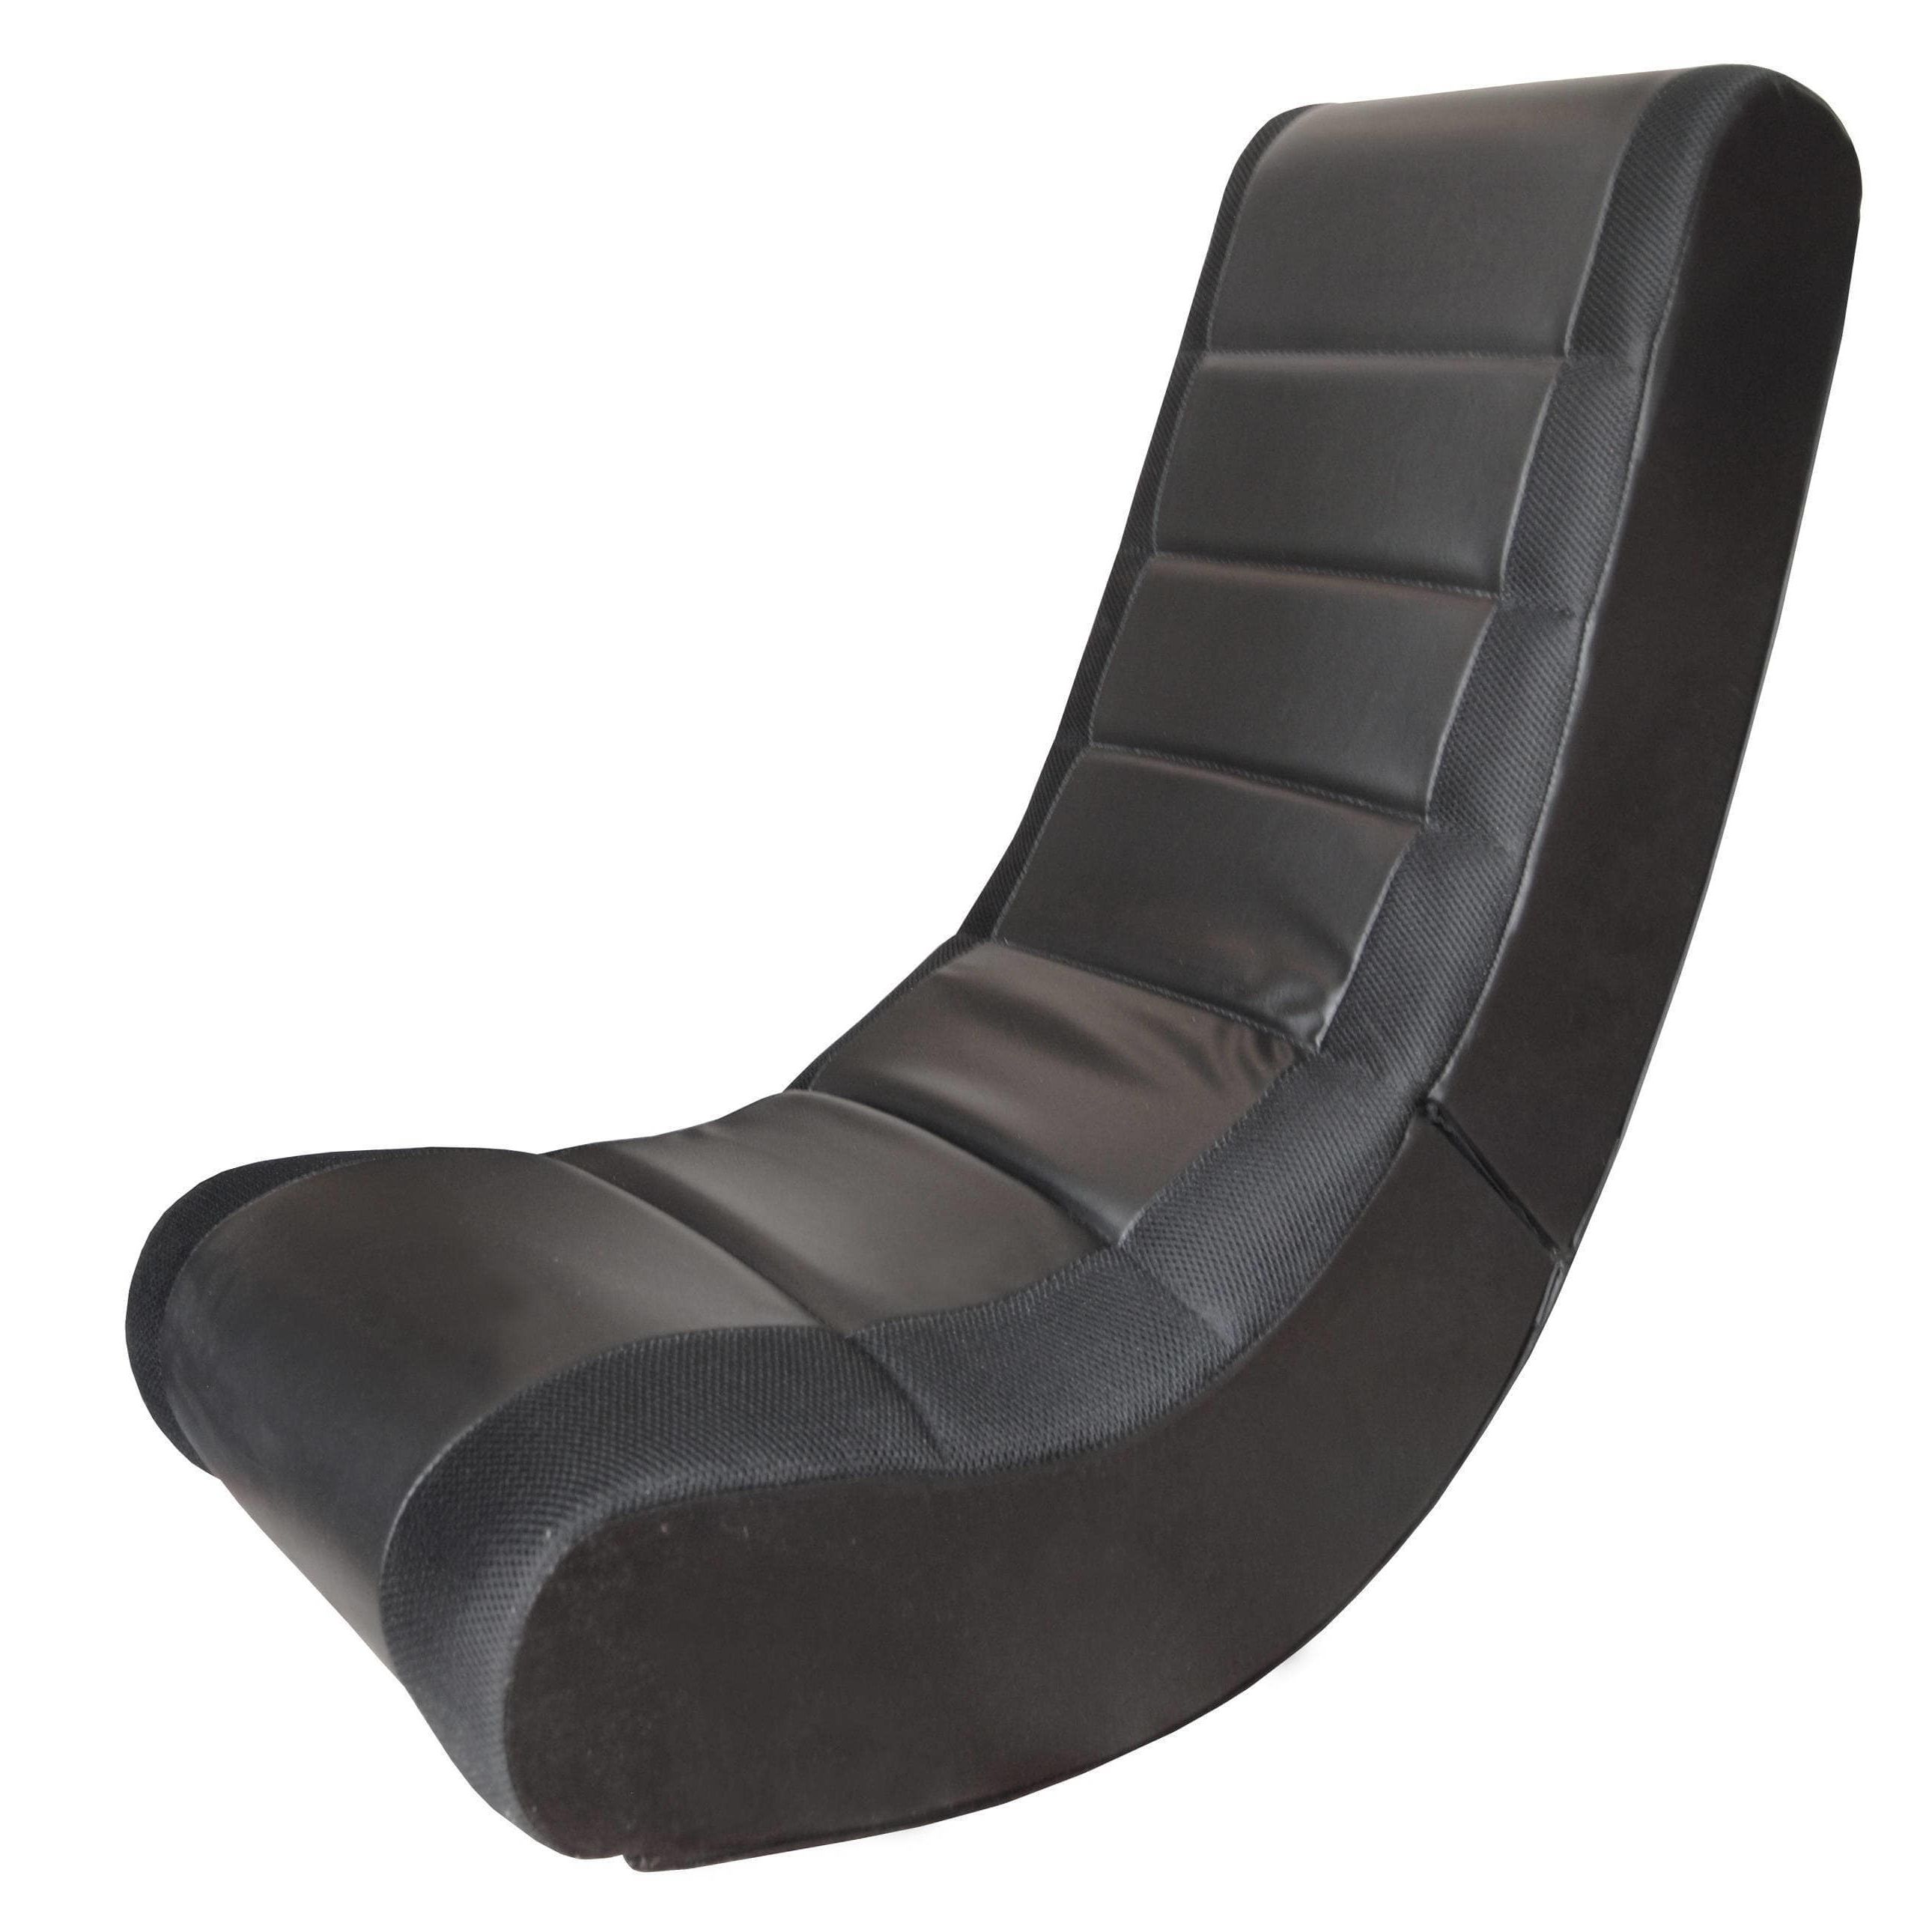 Preferred Gaming Sofa Chairs In Xp1 Folding Gaming Chair – Free Shipping Today – Overstock (View 13 of 20)